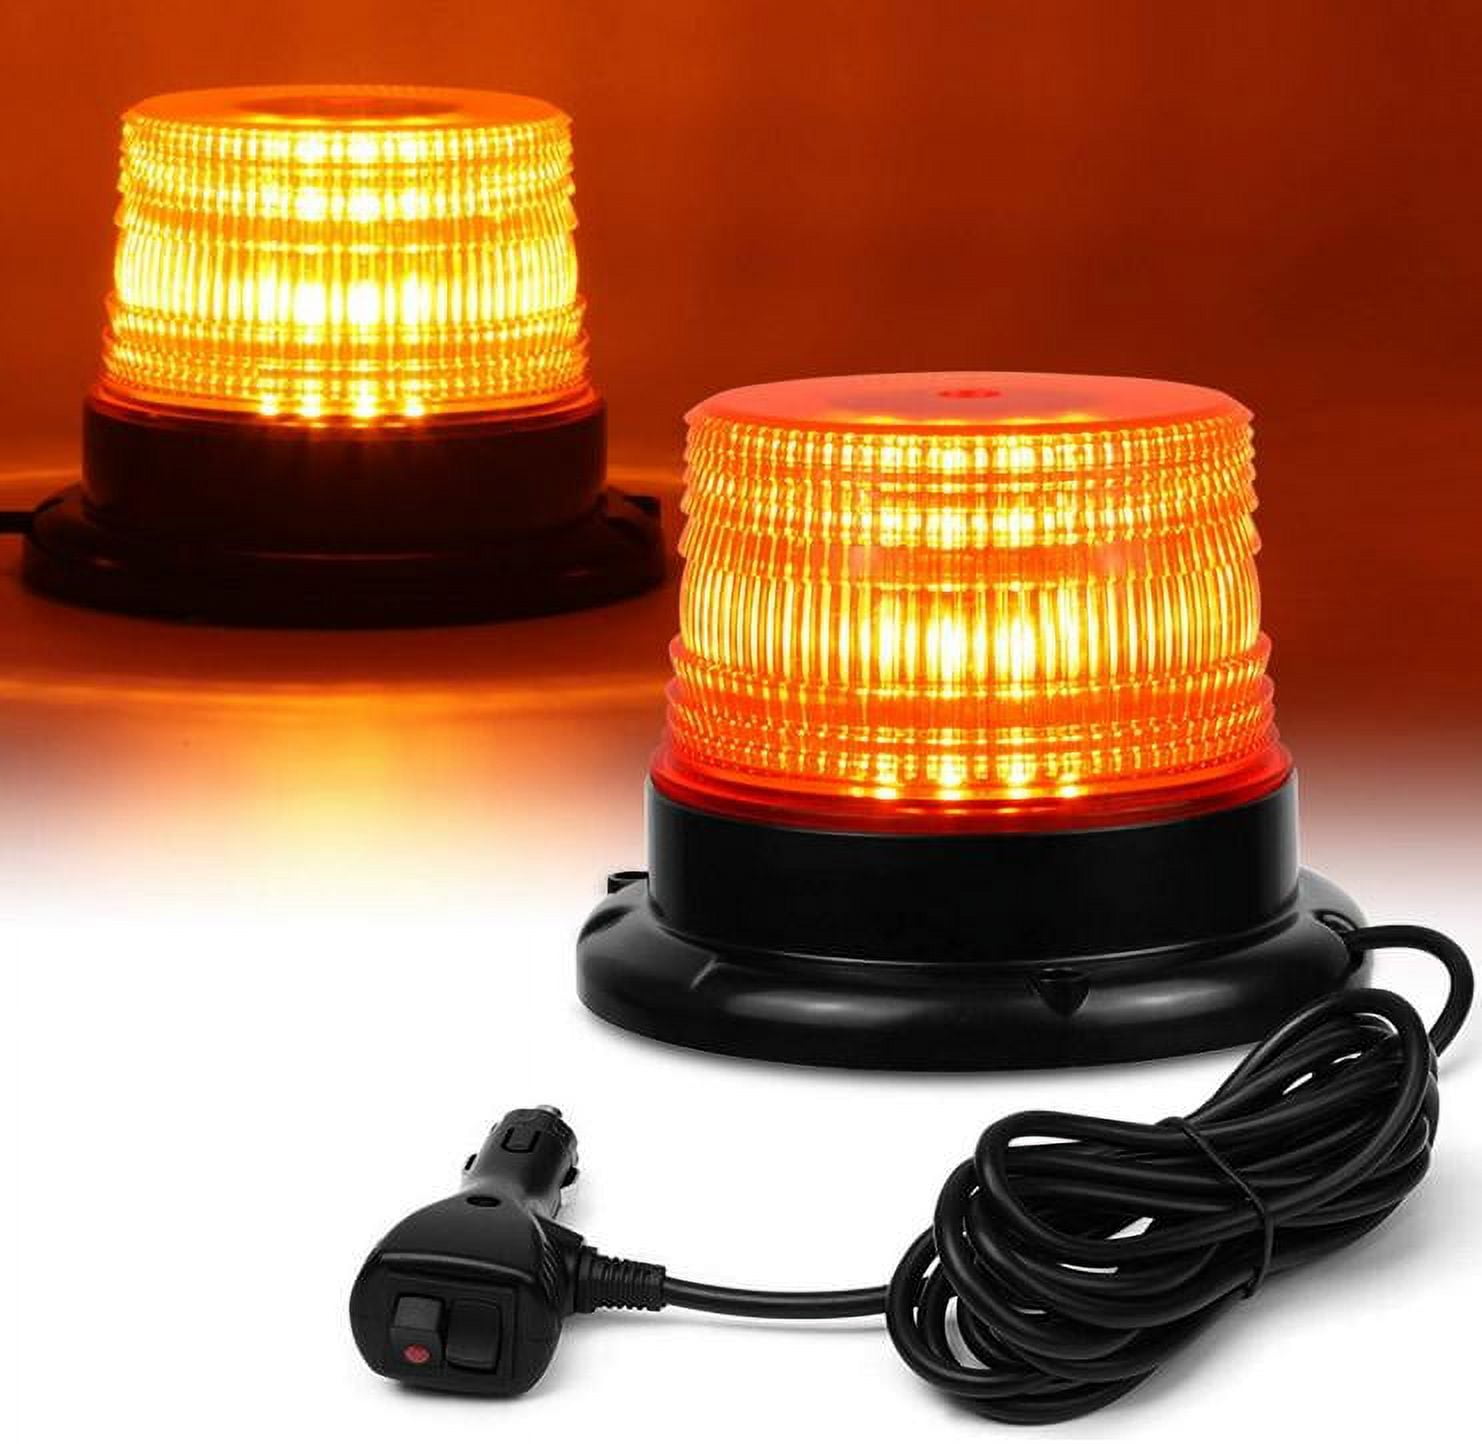 YOMTOVM 40 LED Strobe Beacon Light, 12V-24V Amber Emergency Warning Safety  Flashing Beacon Light with Magnetic and 16 ft Straight Cord for Vehicle